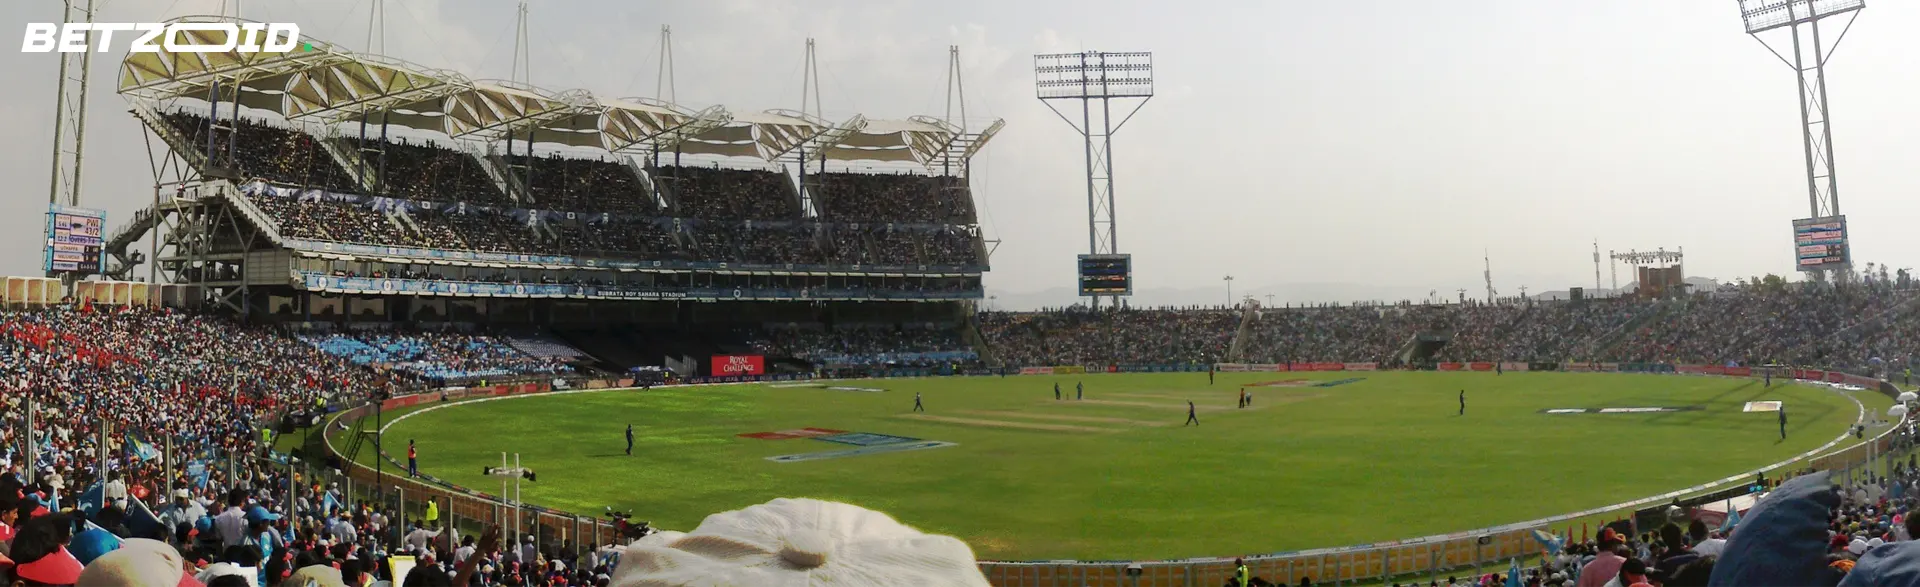 A packed cricket stadium with spectators watching a live match, representing licensed online betting platforms for cricket fans in Canada.